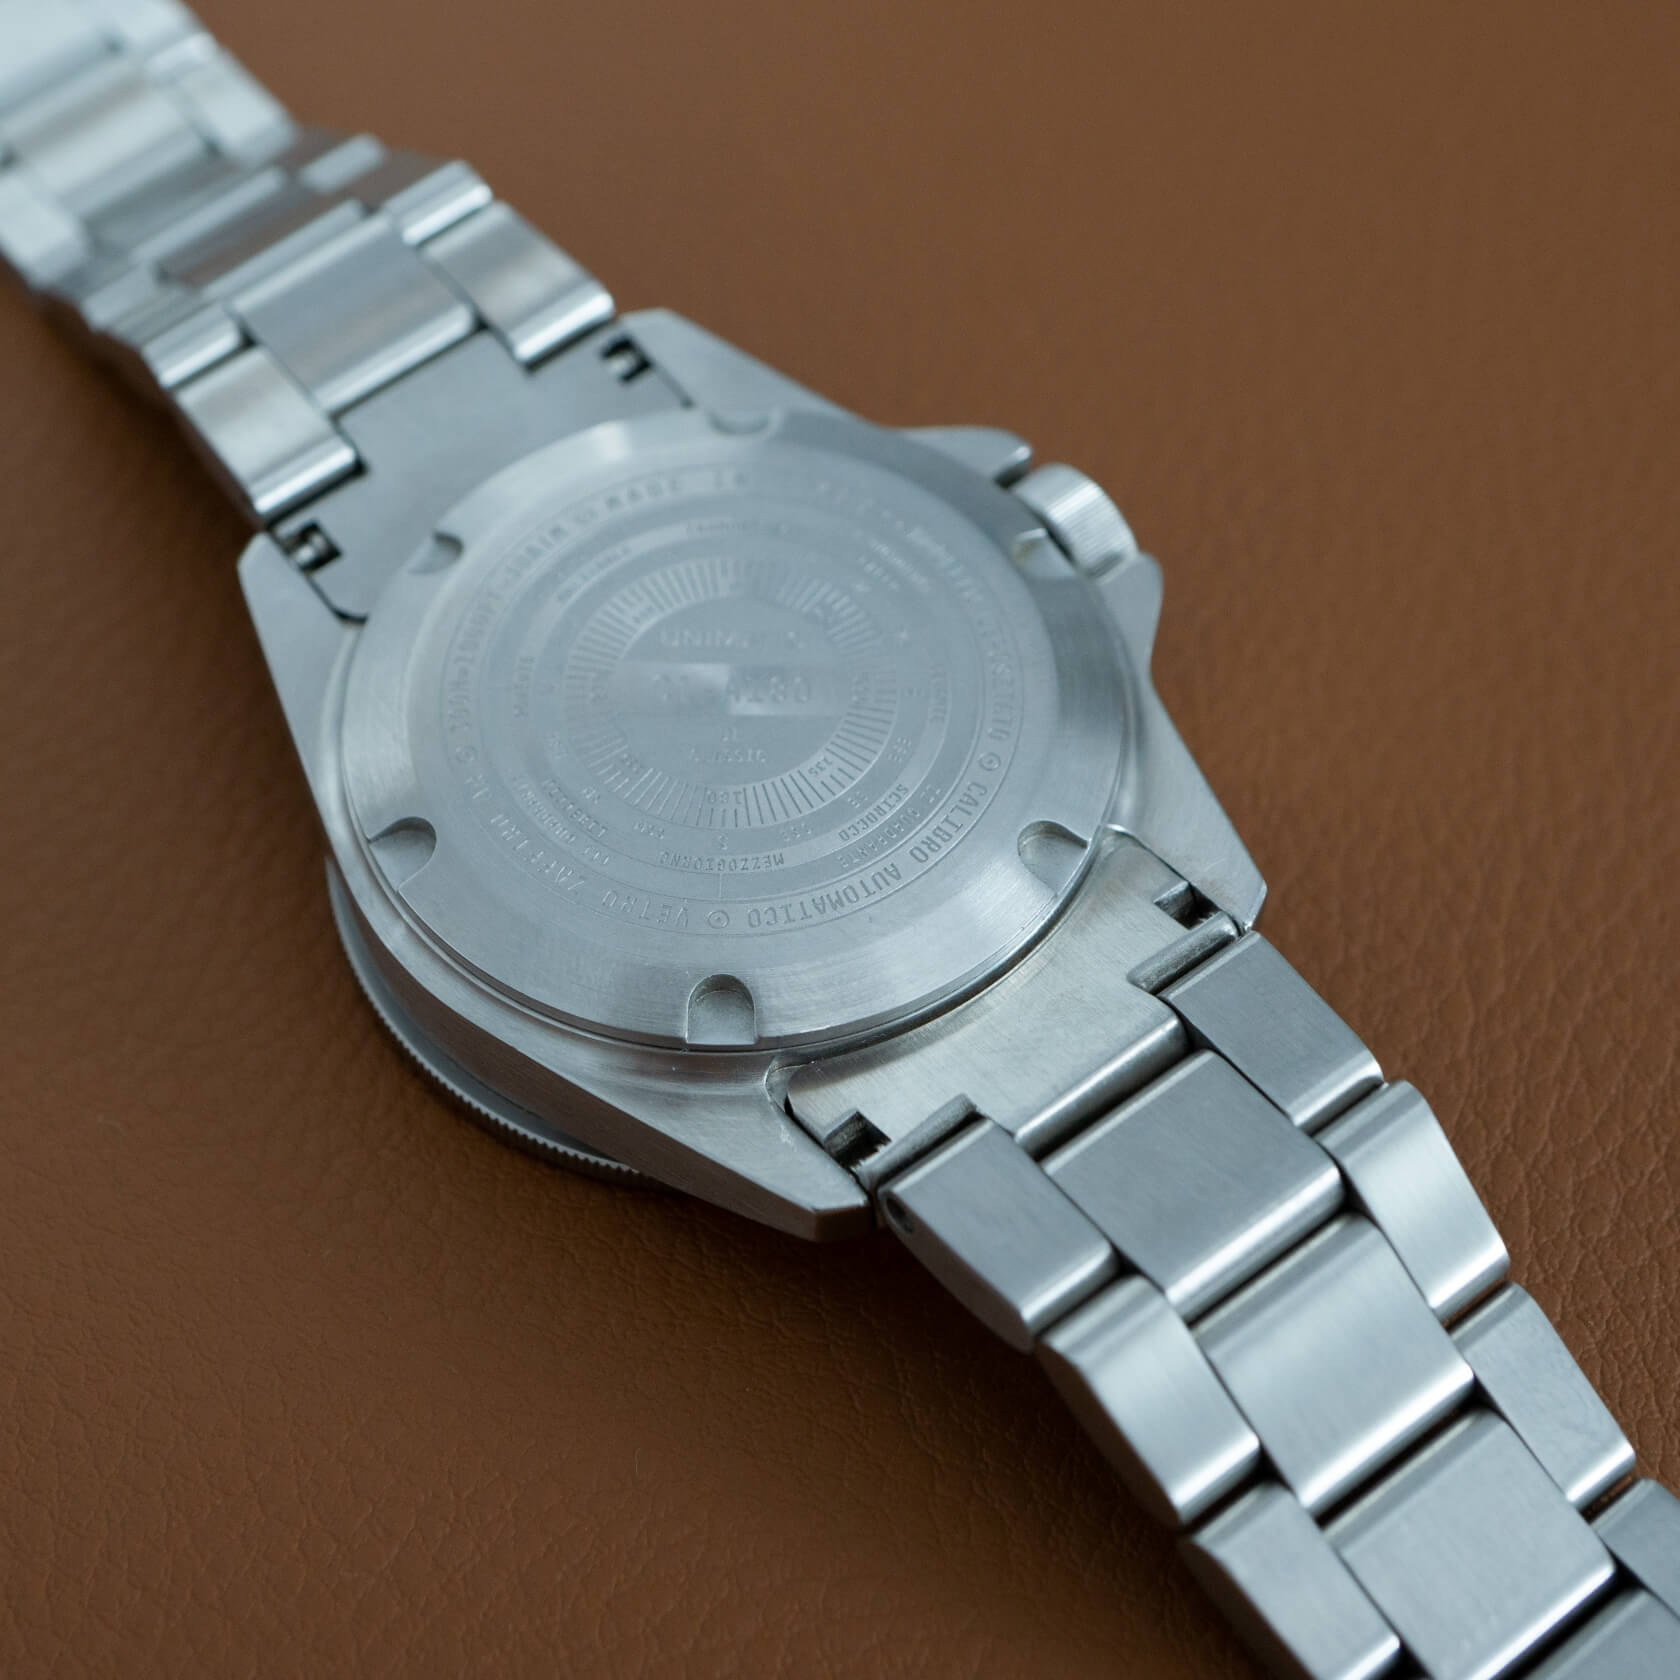 Unimatic Stainless Steel Bracelet view from the case back